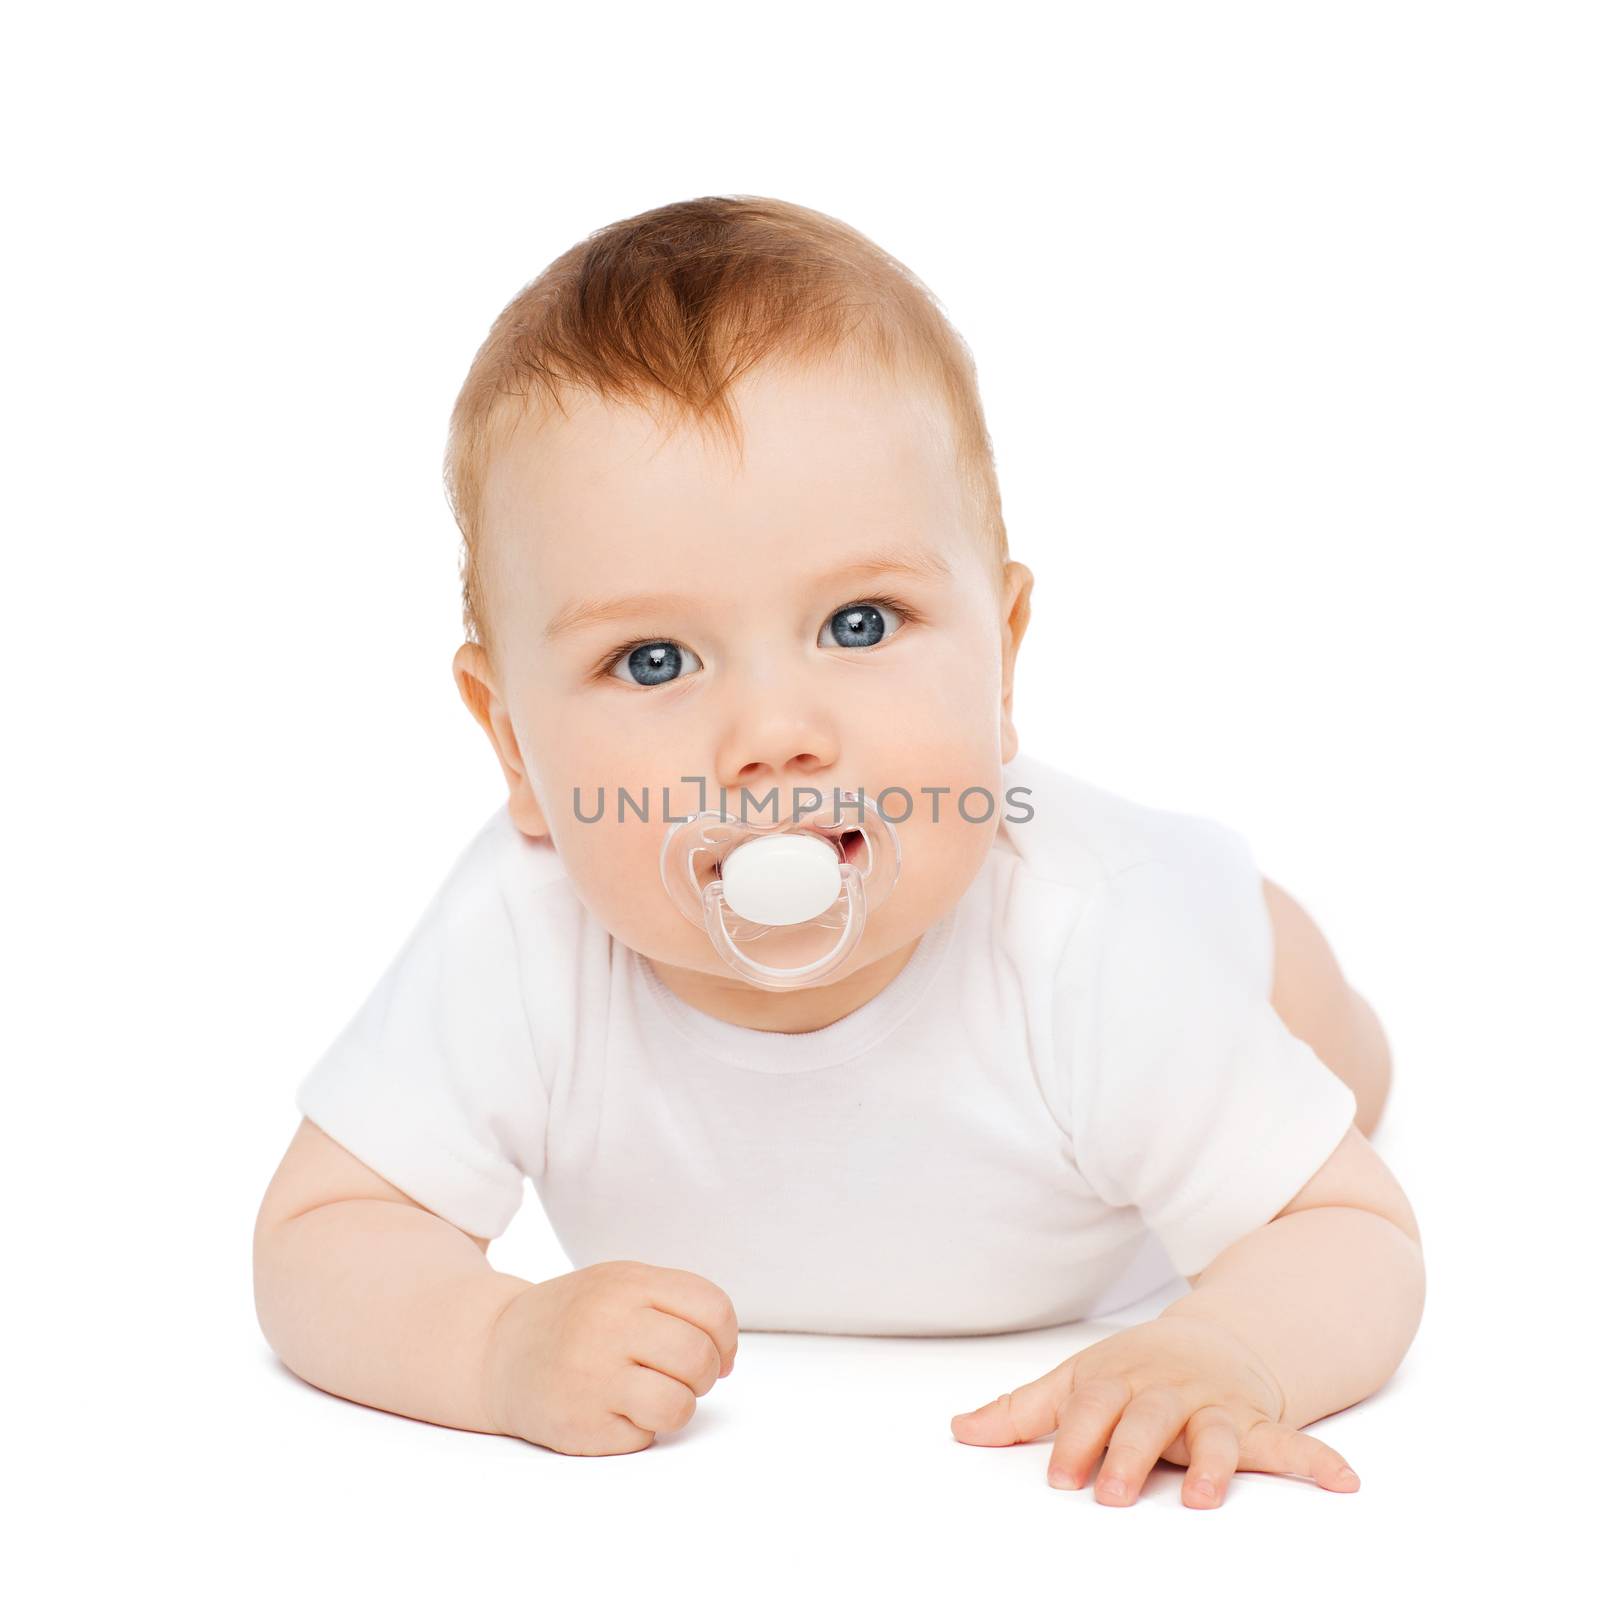 child and toddler concept - smiling baby lying on floor with dummy in mouth